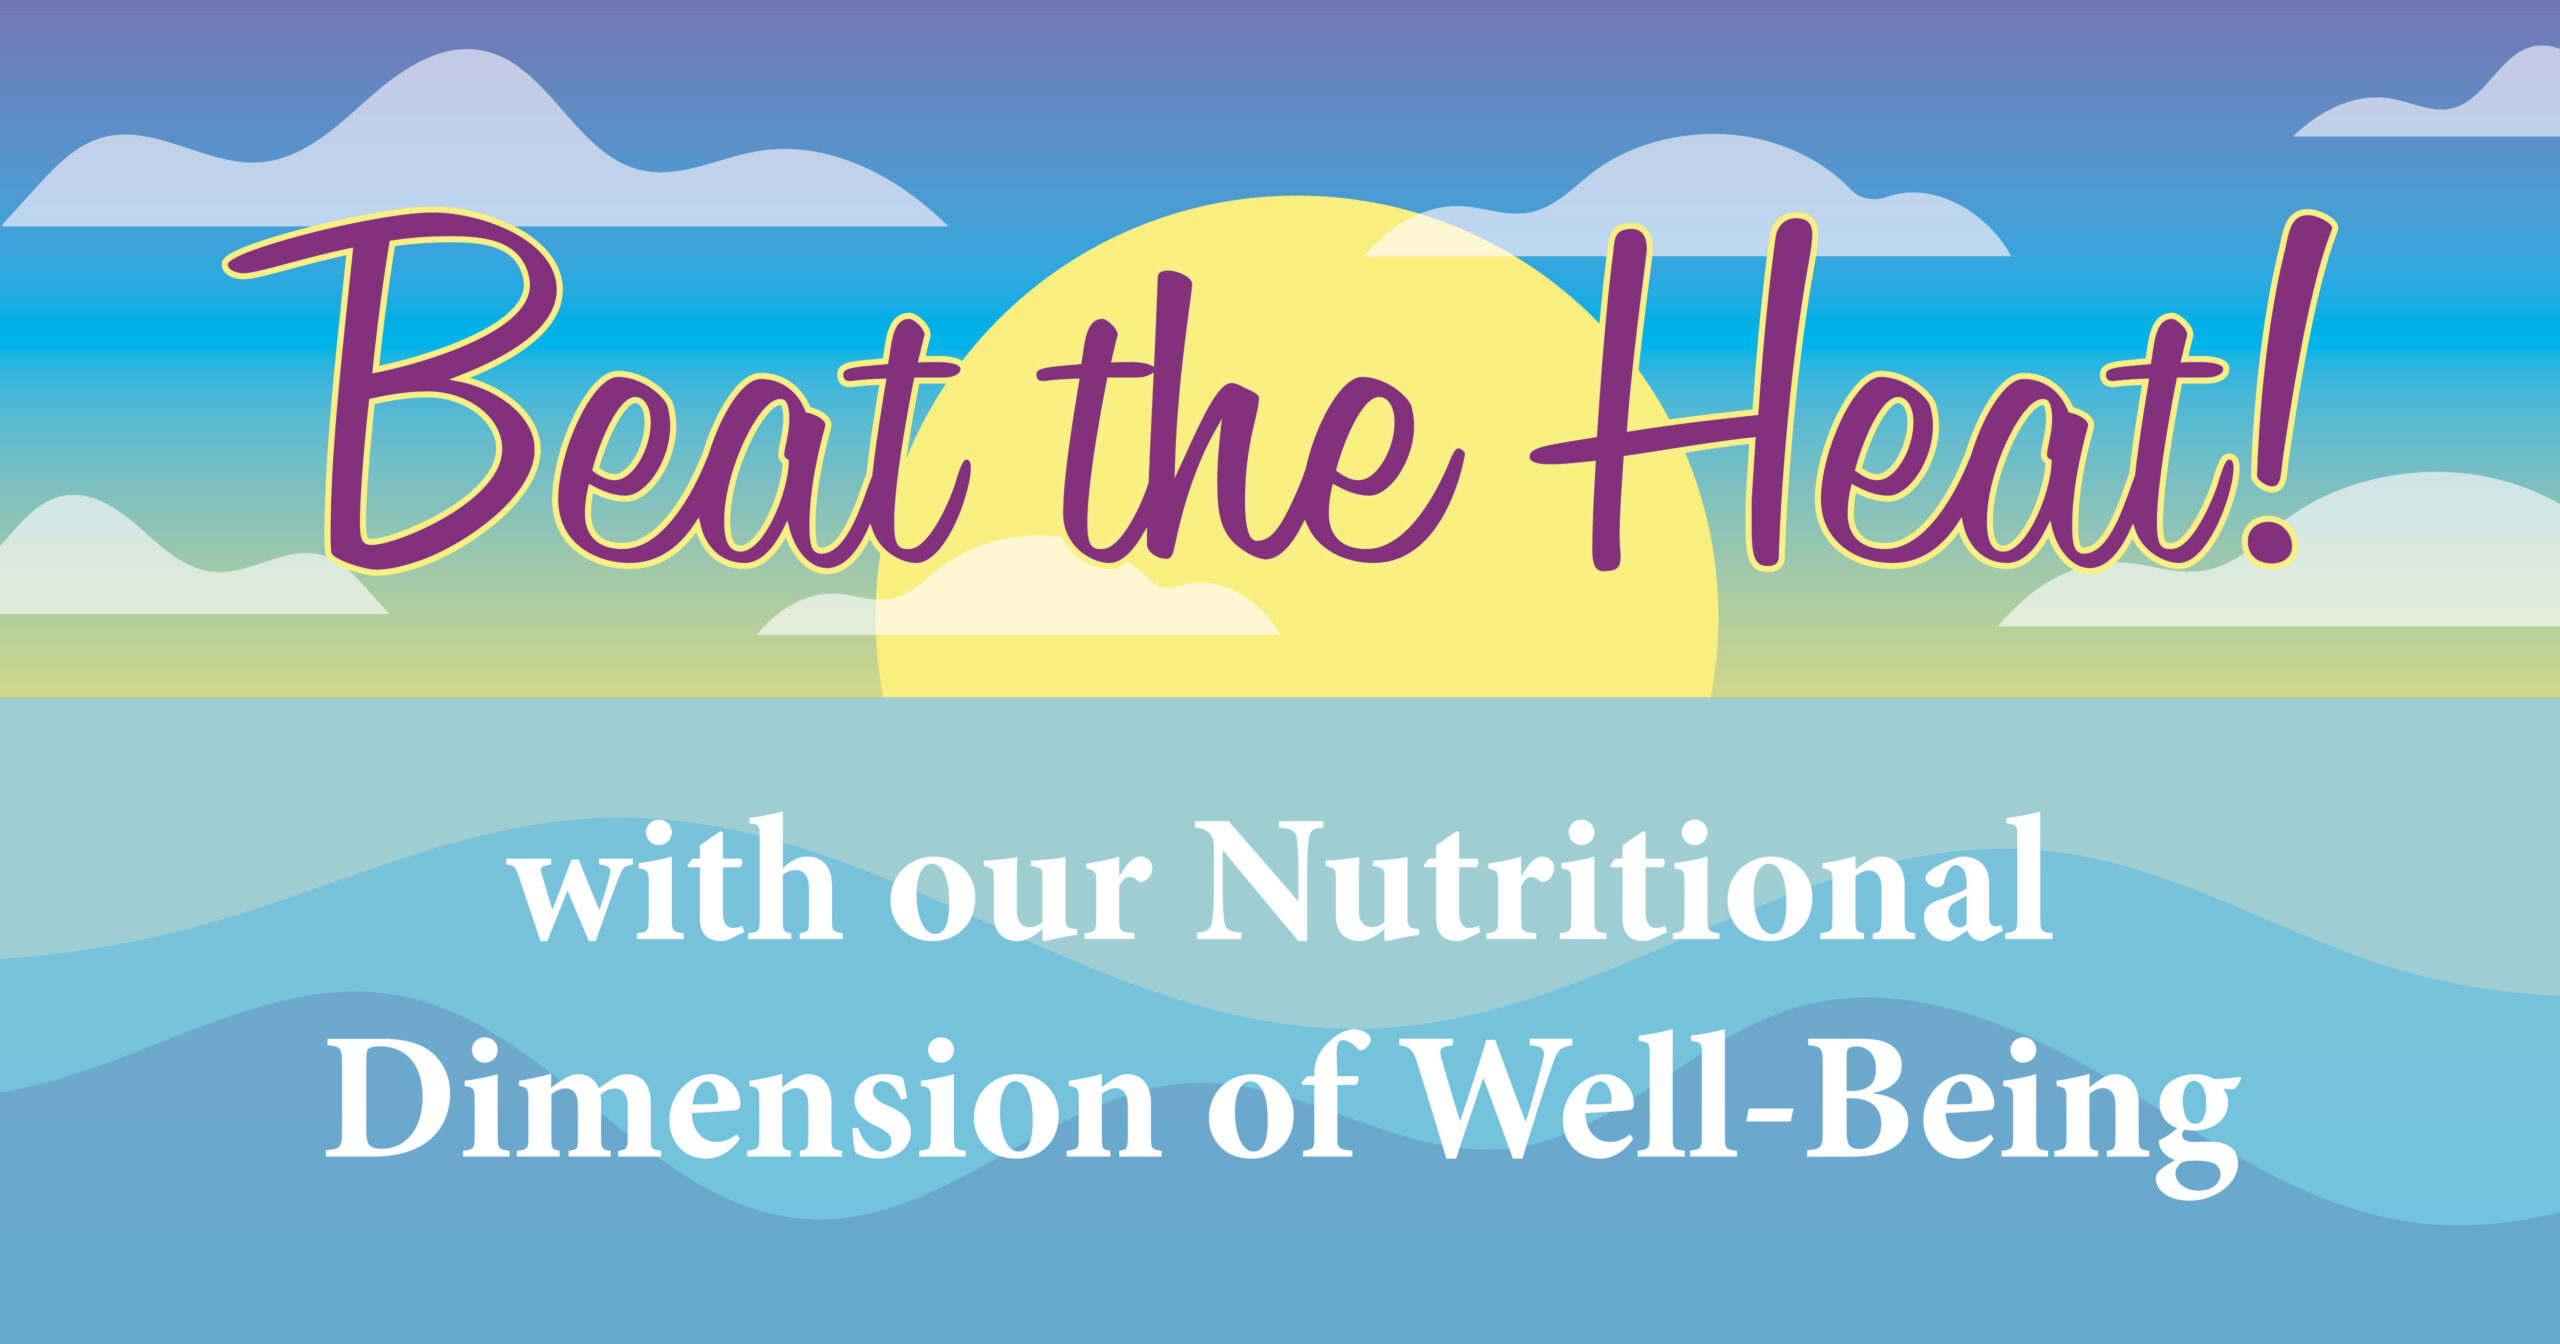 Beat The Heat With Our Nutritional Dimension of Well-Being